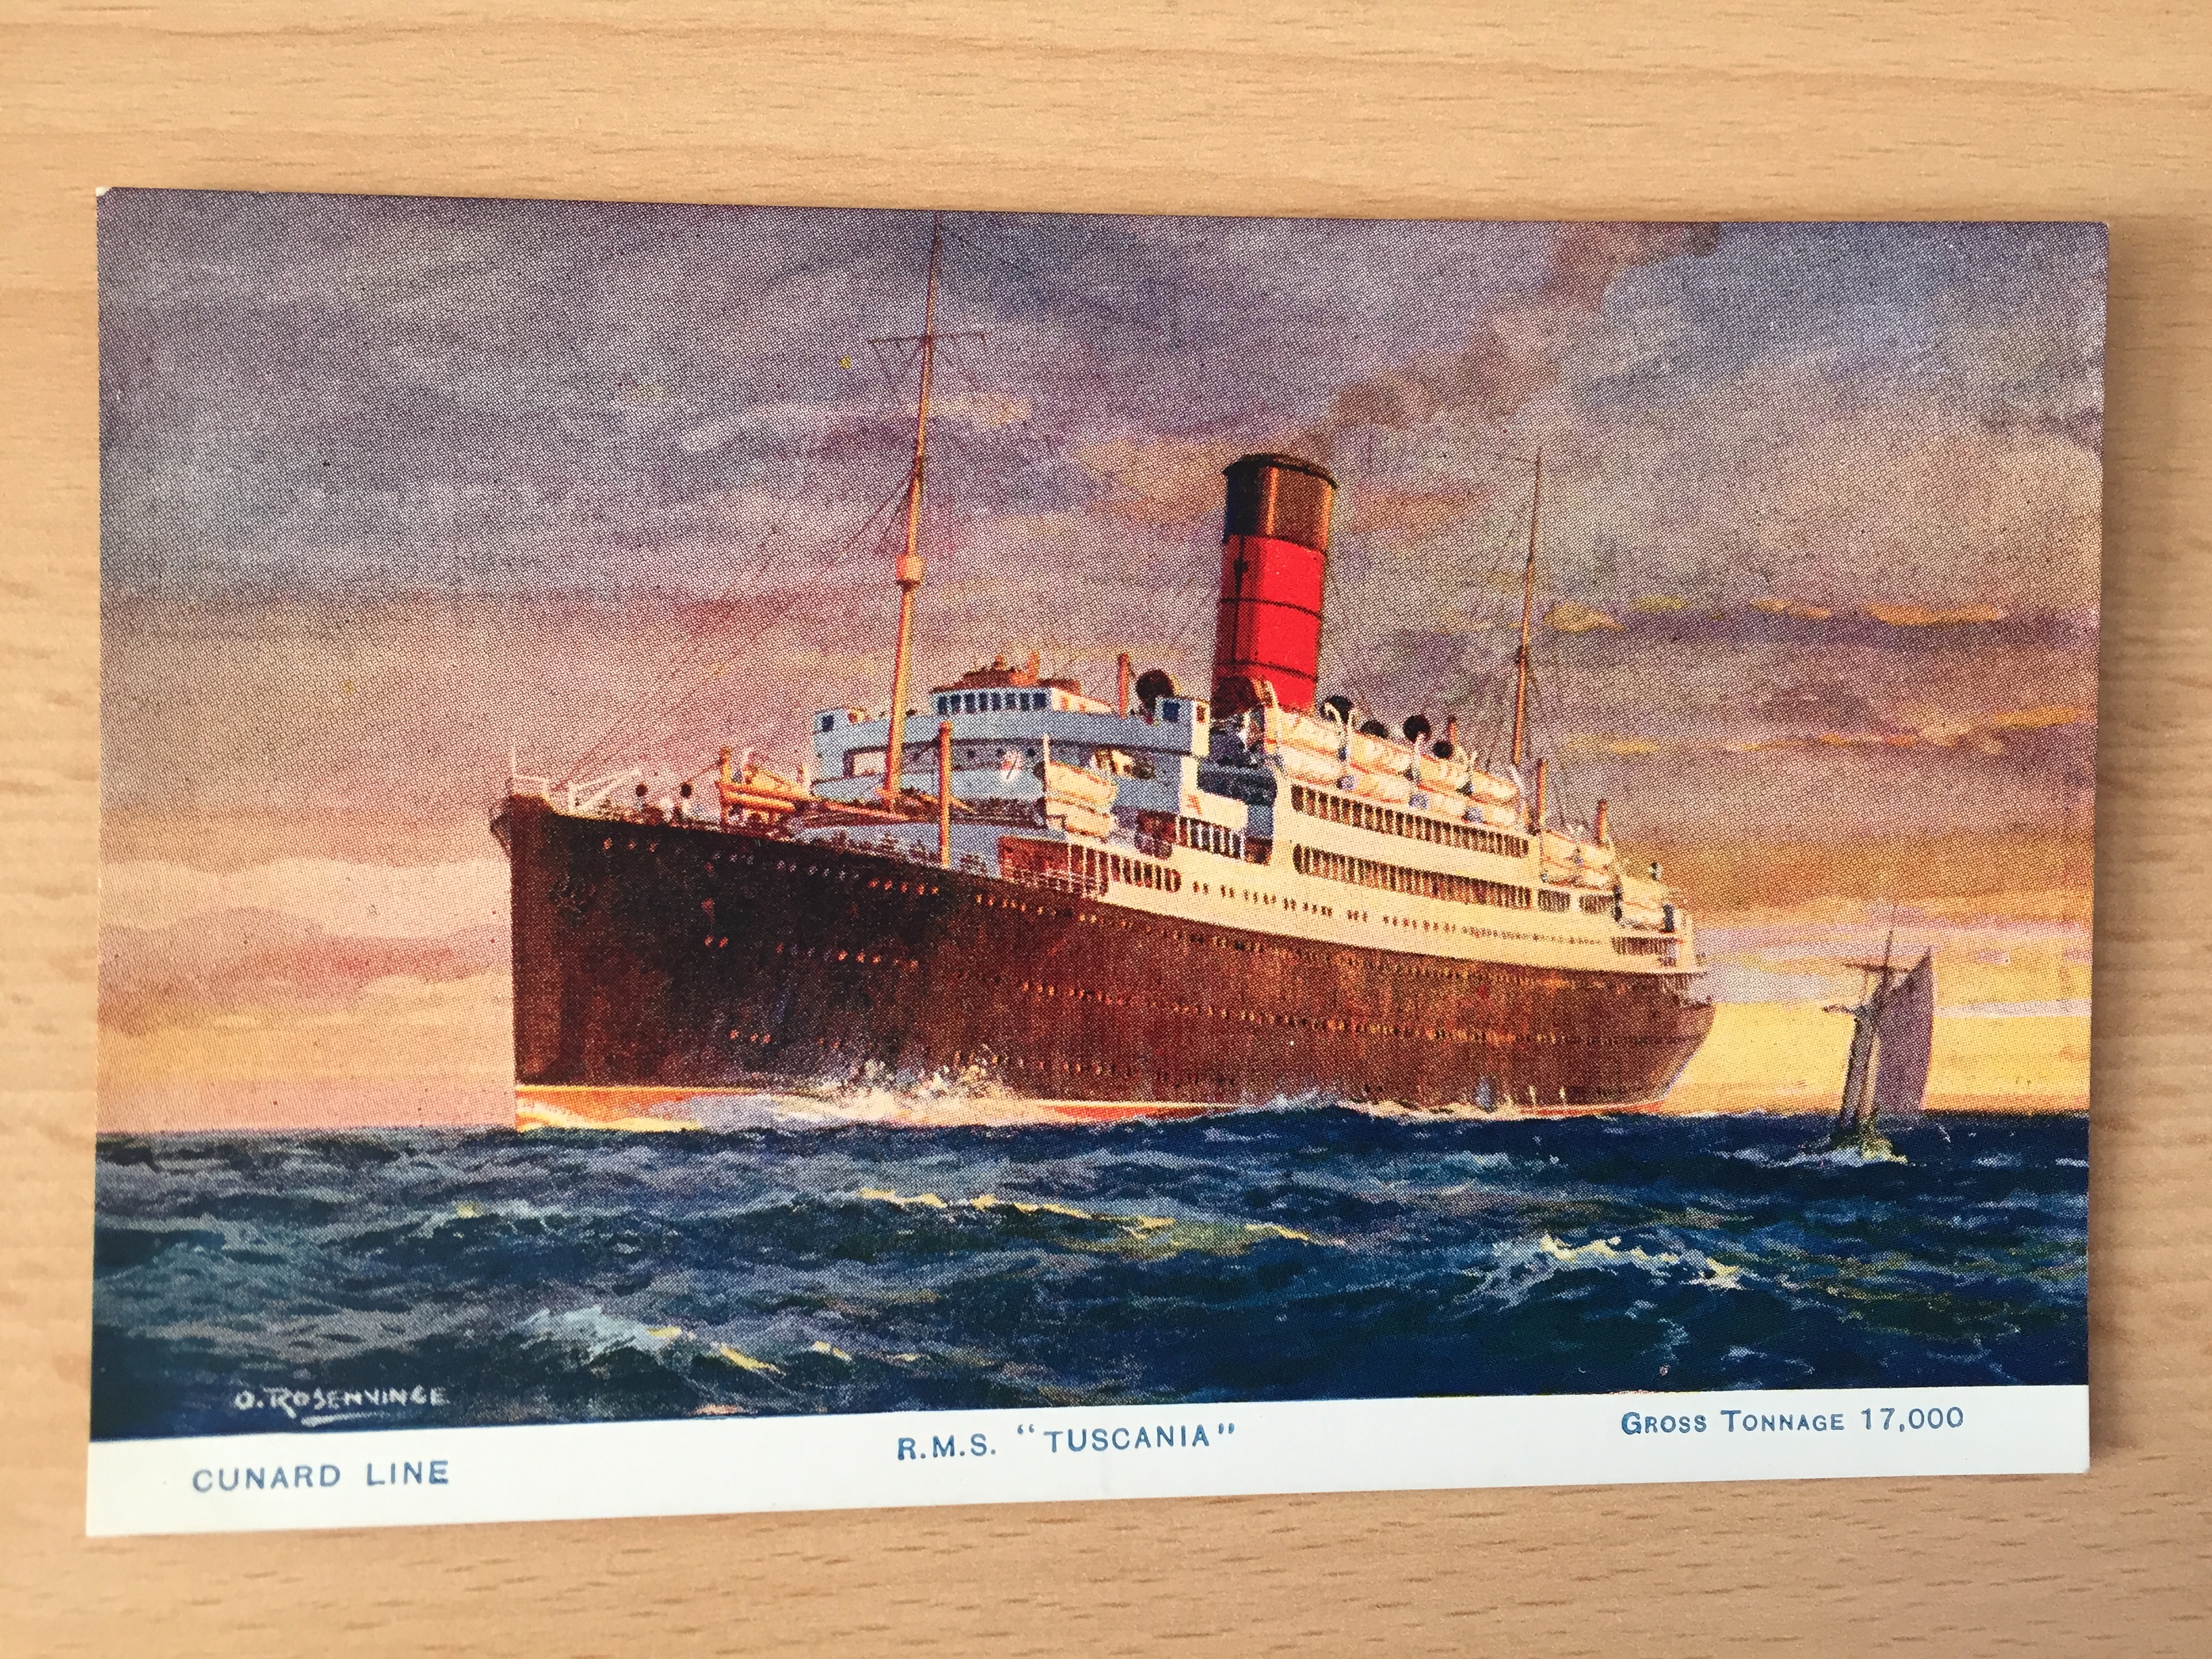 COLOUR POSTCARD OF THE CUNARD LINE VESSEL THE RMS TUSCANIA